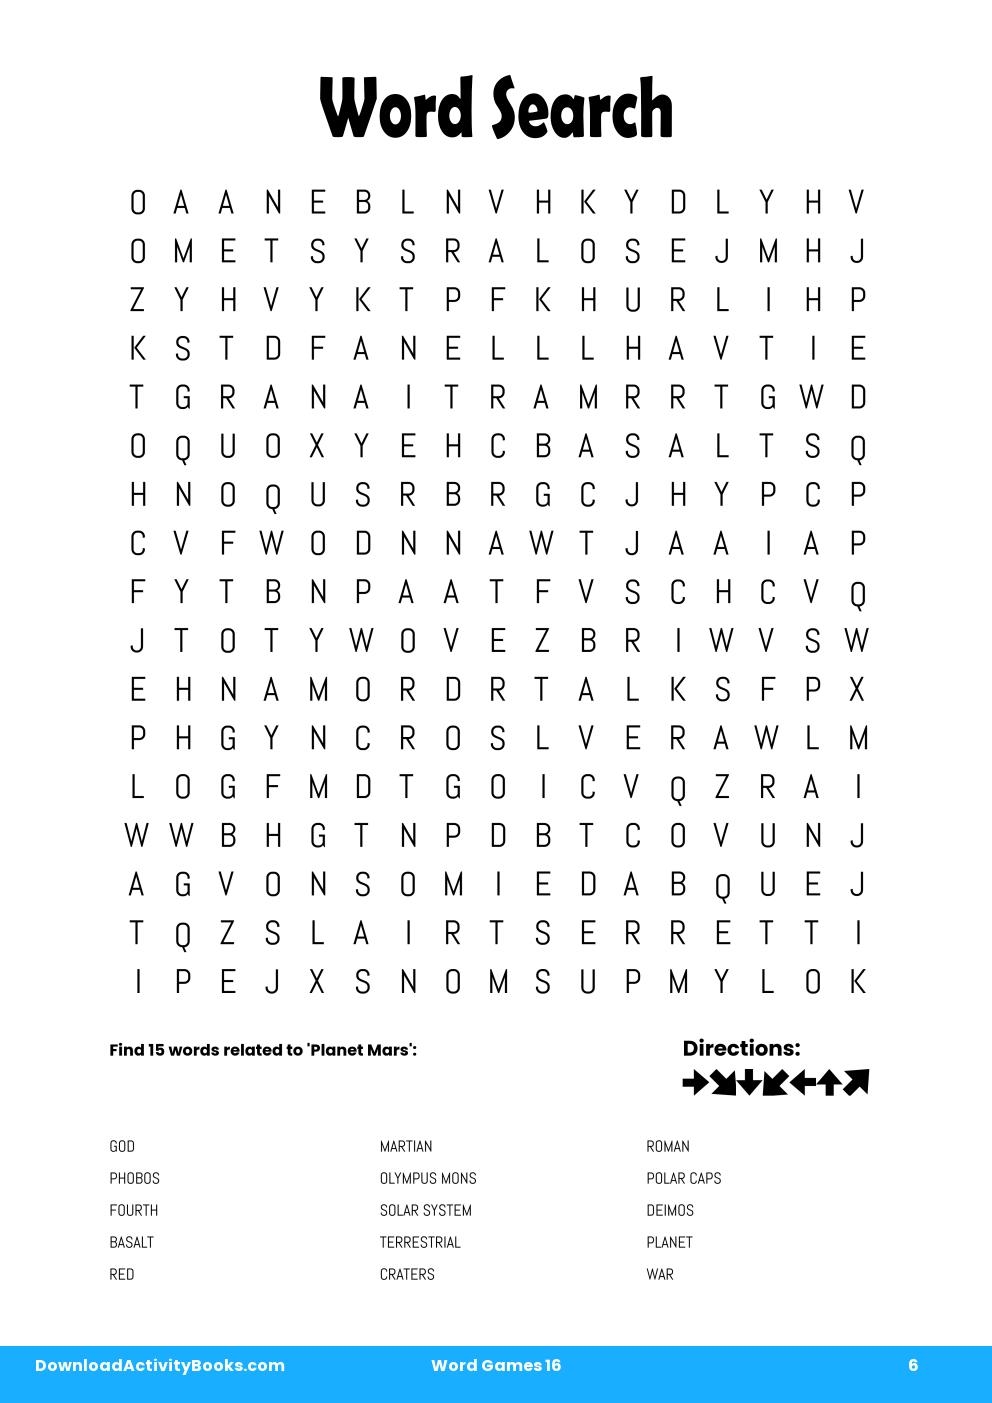 Word Search in Word Games 16